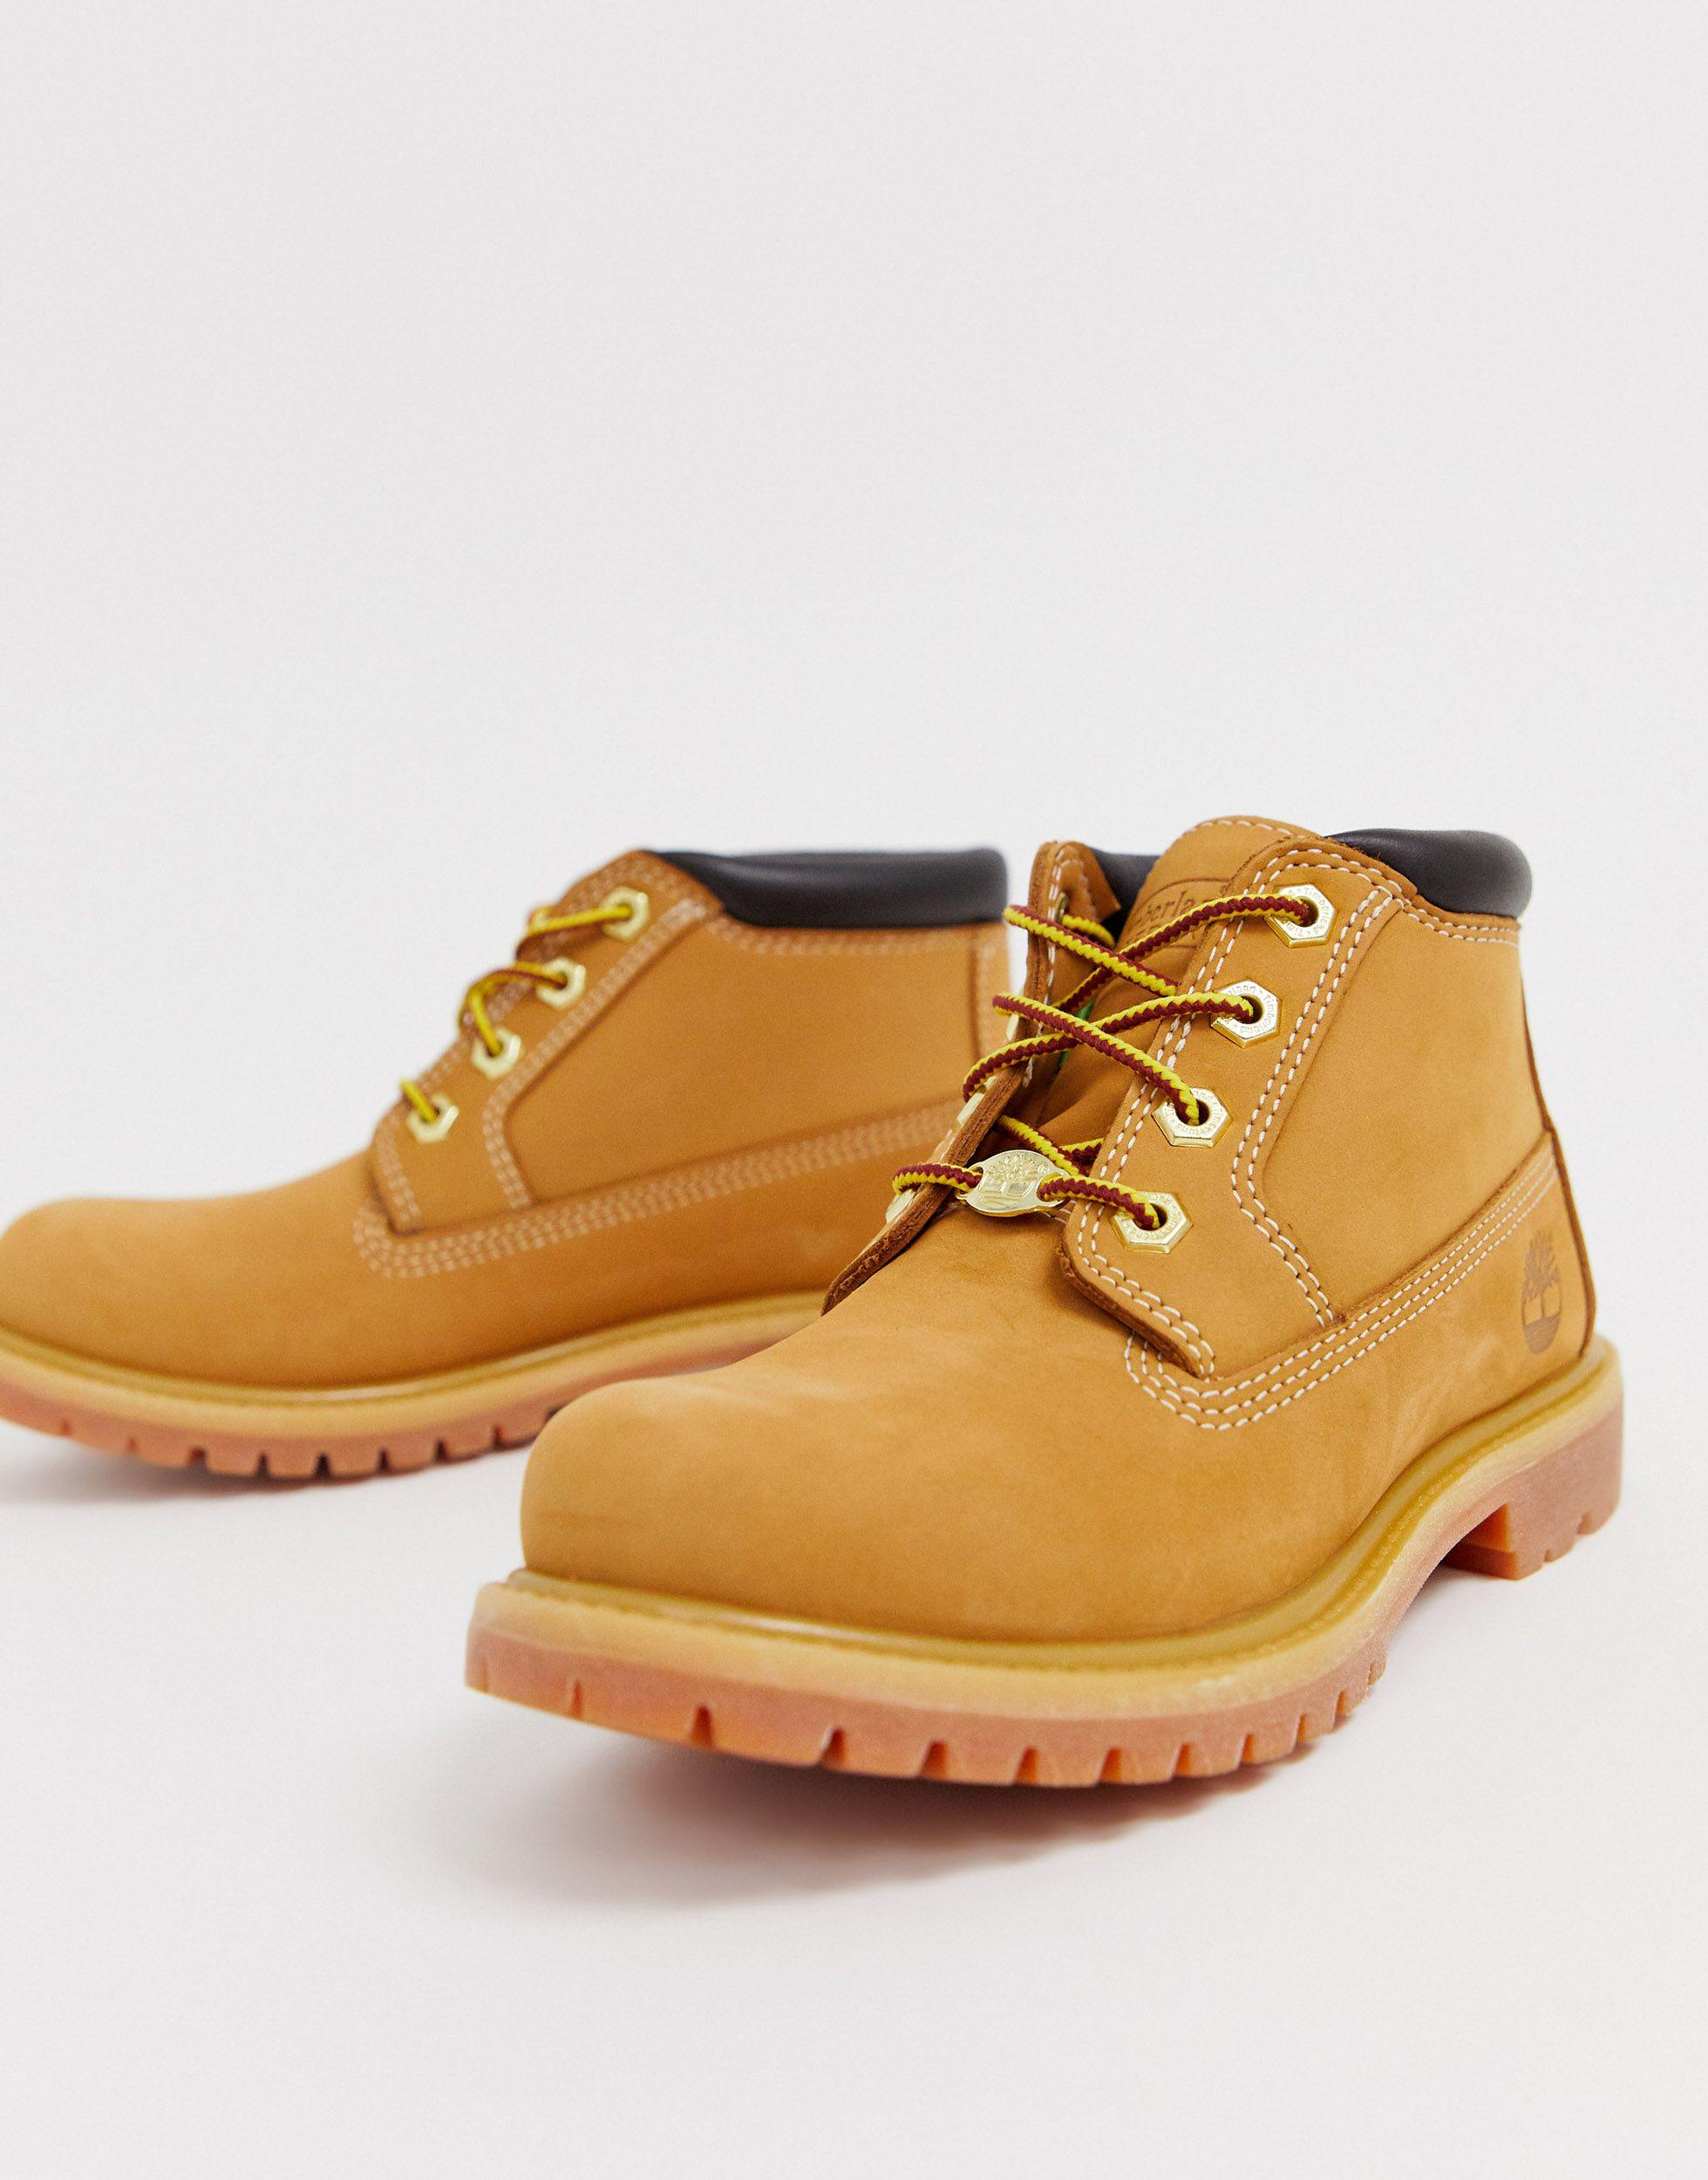 Timberland Kenniston Nellie Wheat Beige Nubuck Leather Flat Ankle Boots -  Lyst